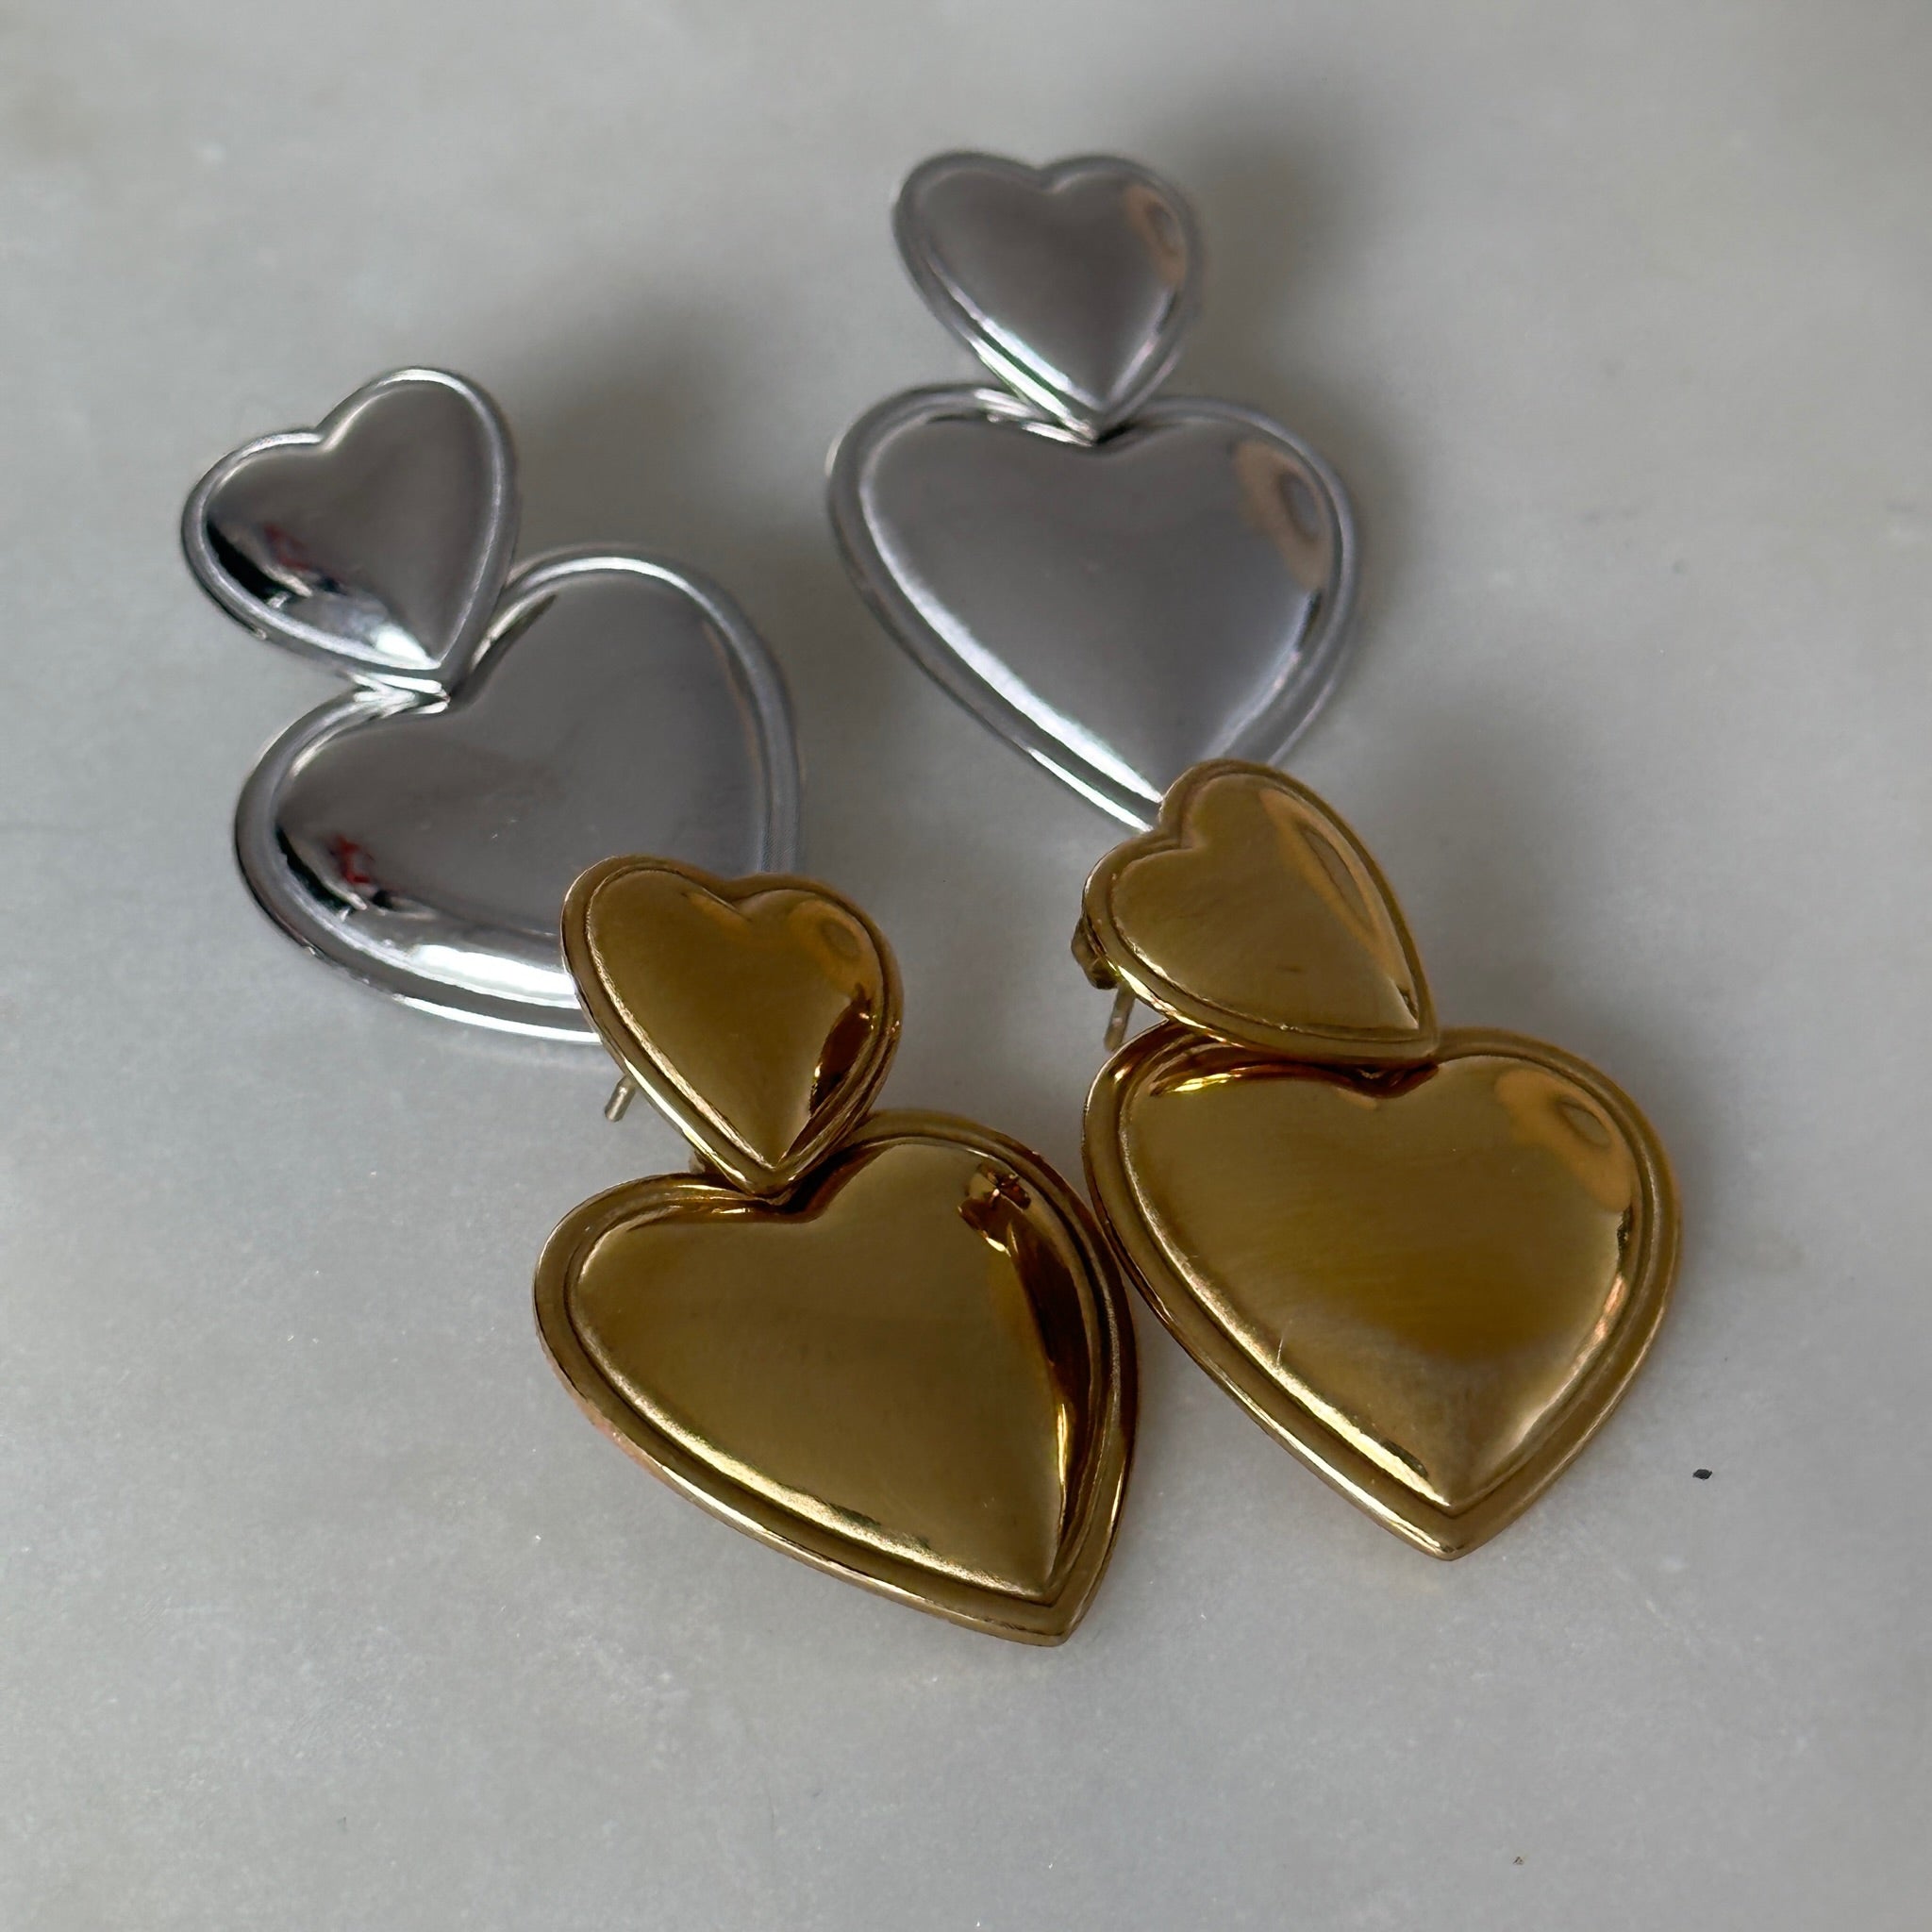 doubled up heart earrings - preorder